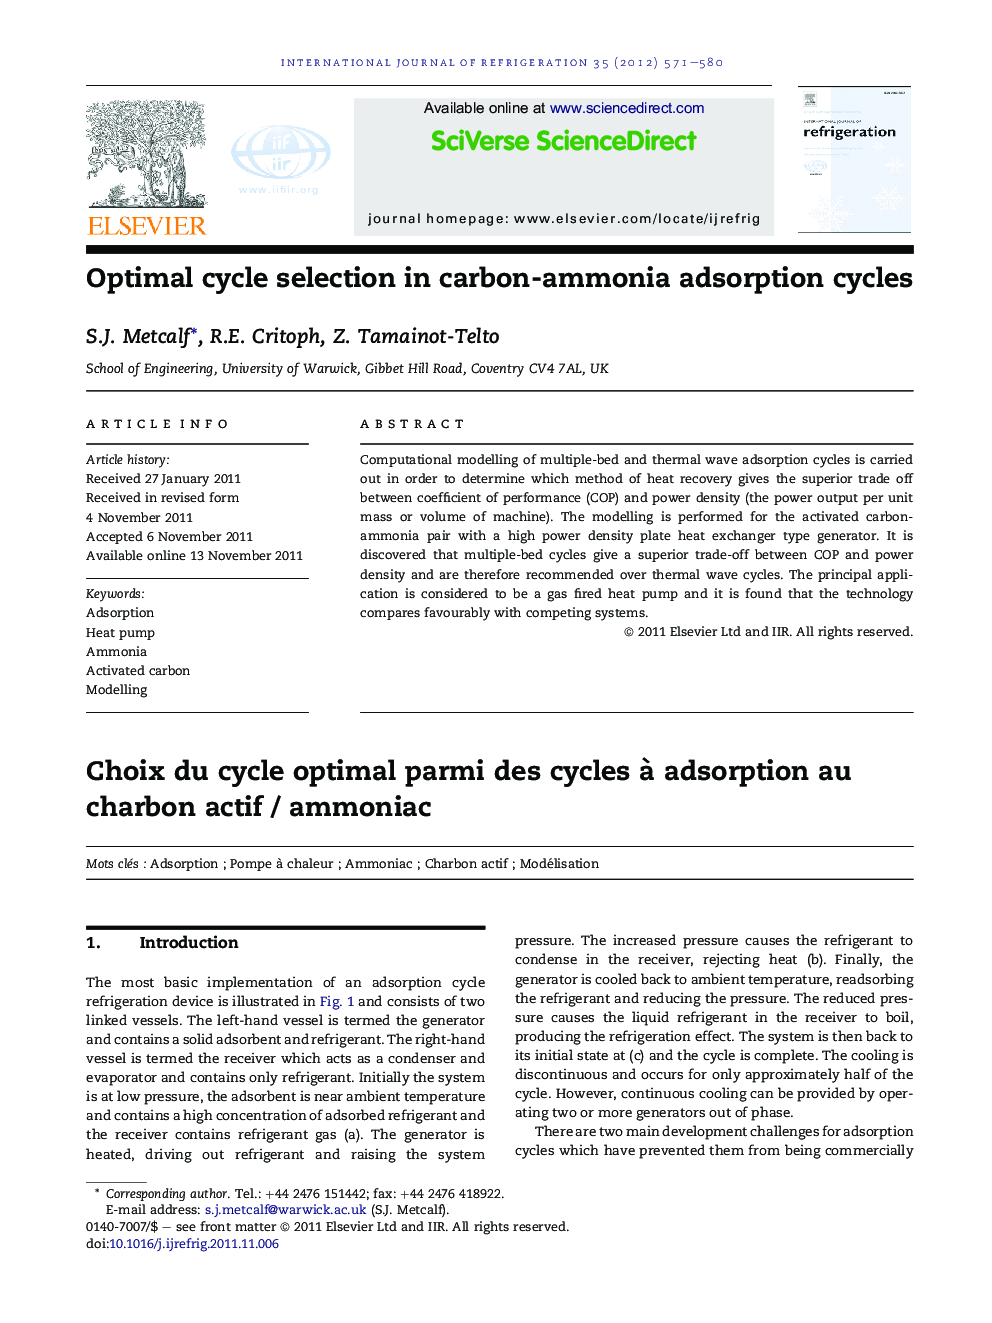 Optimal cycle selection in carbon-ammonia adsorption cycles